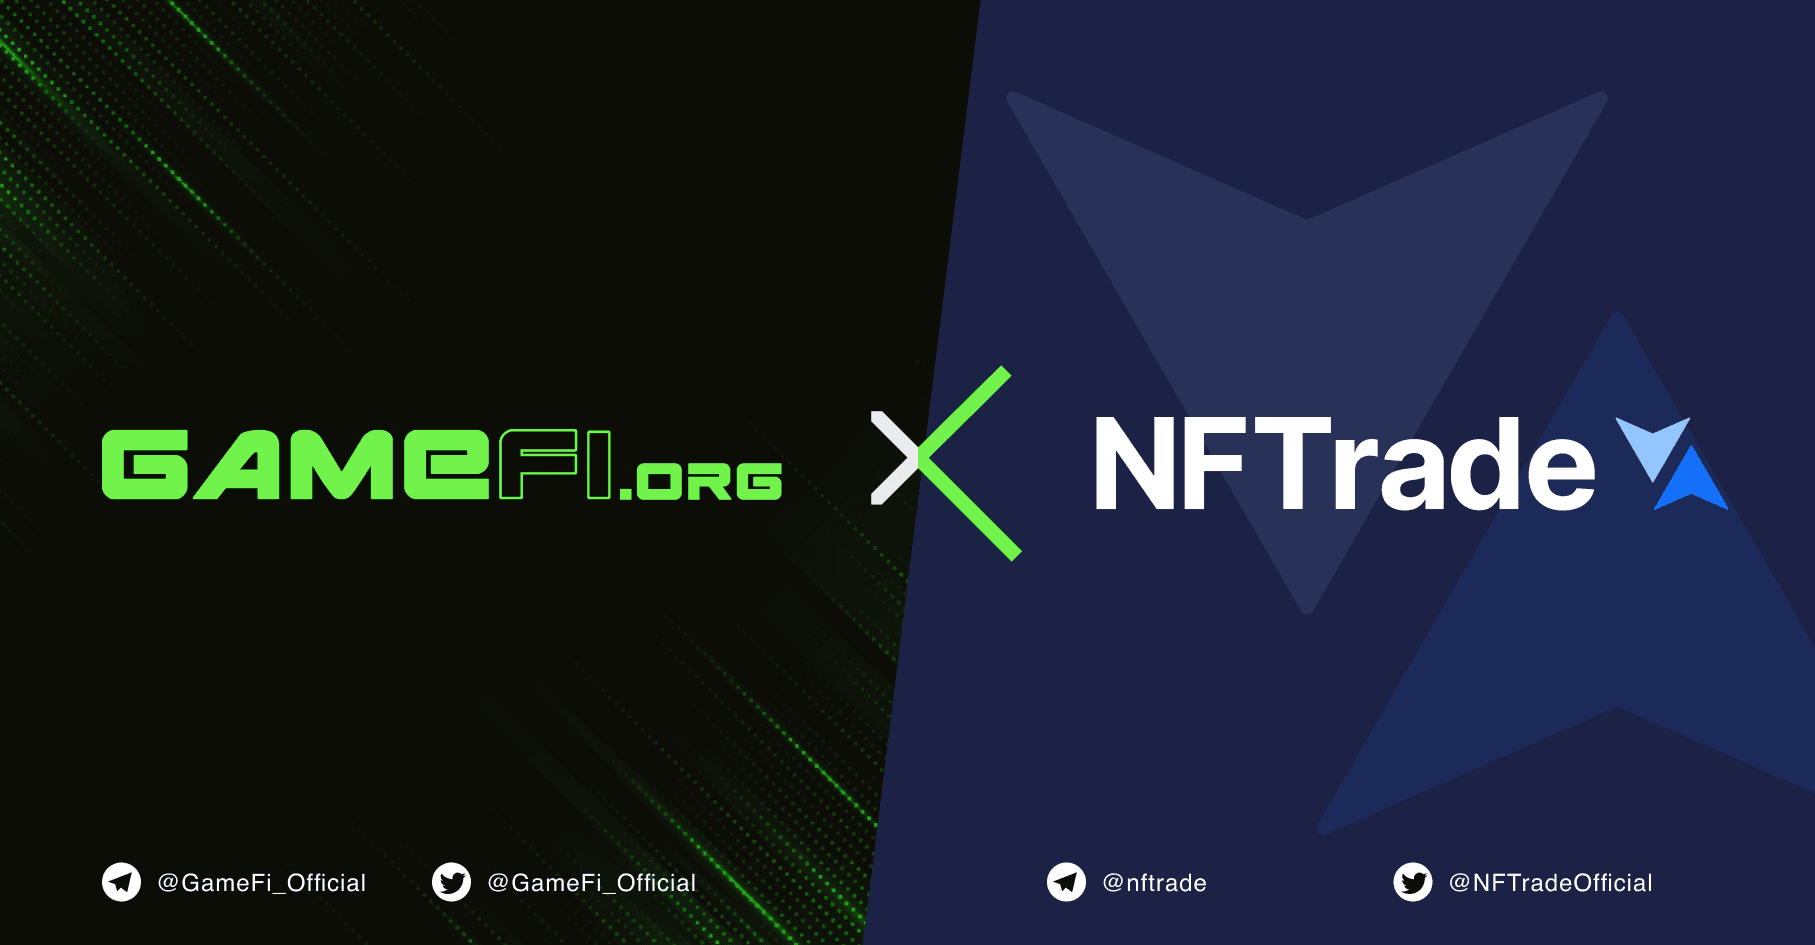 GameFi.org and NFTrade Partner for Liquidity Development of NFT Gaming & Metaverse Assets